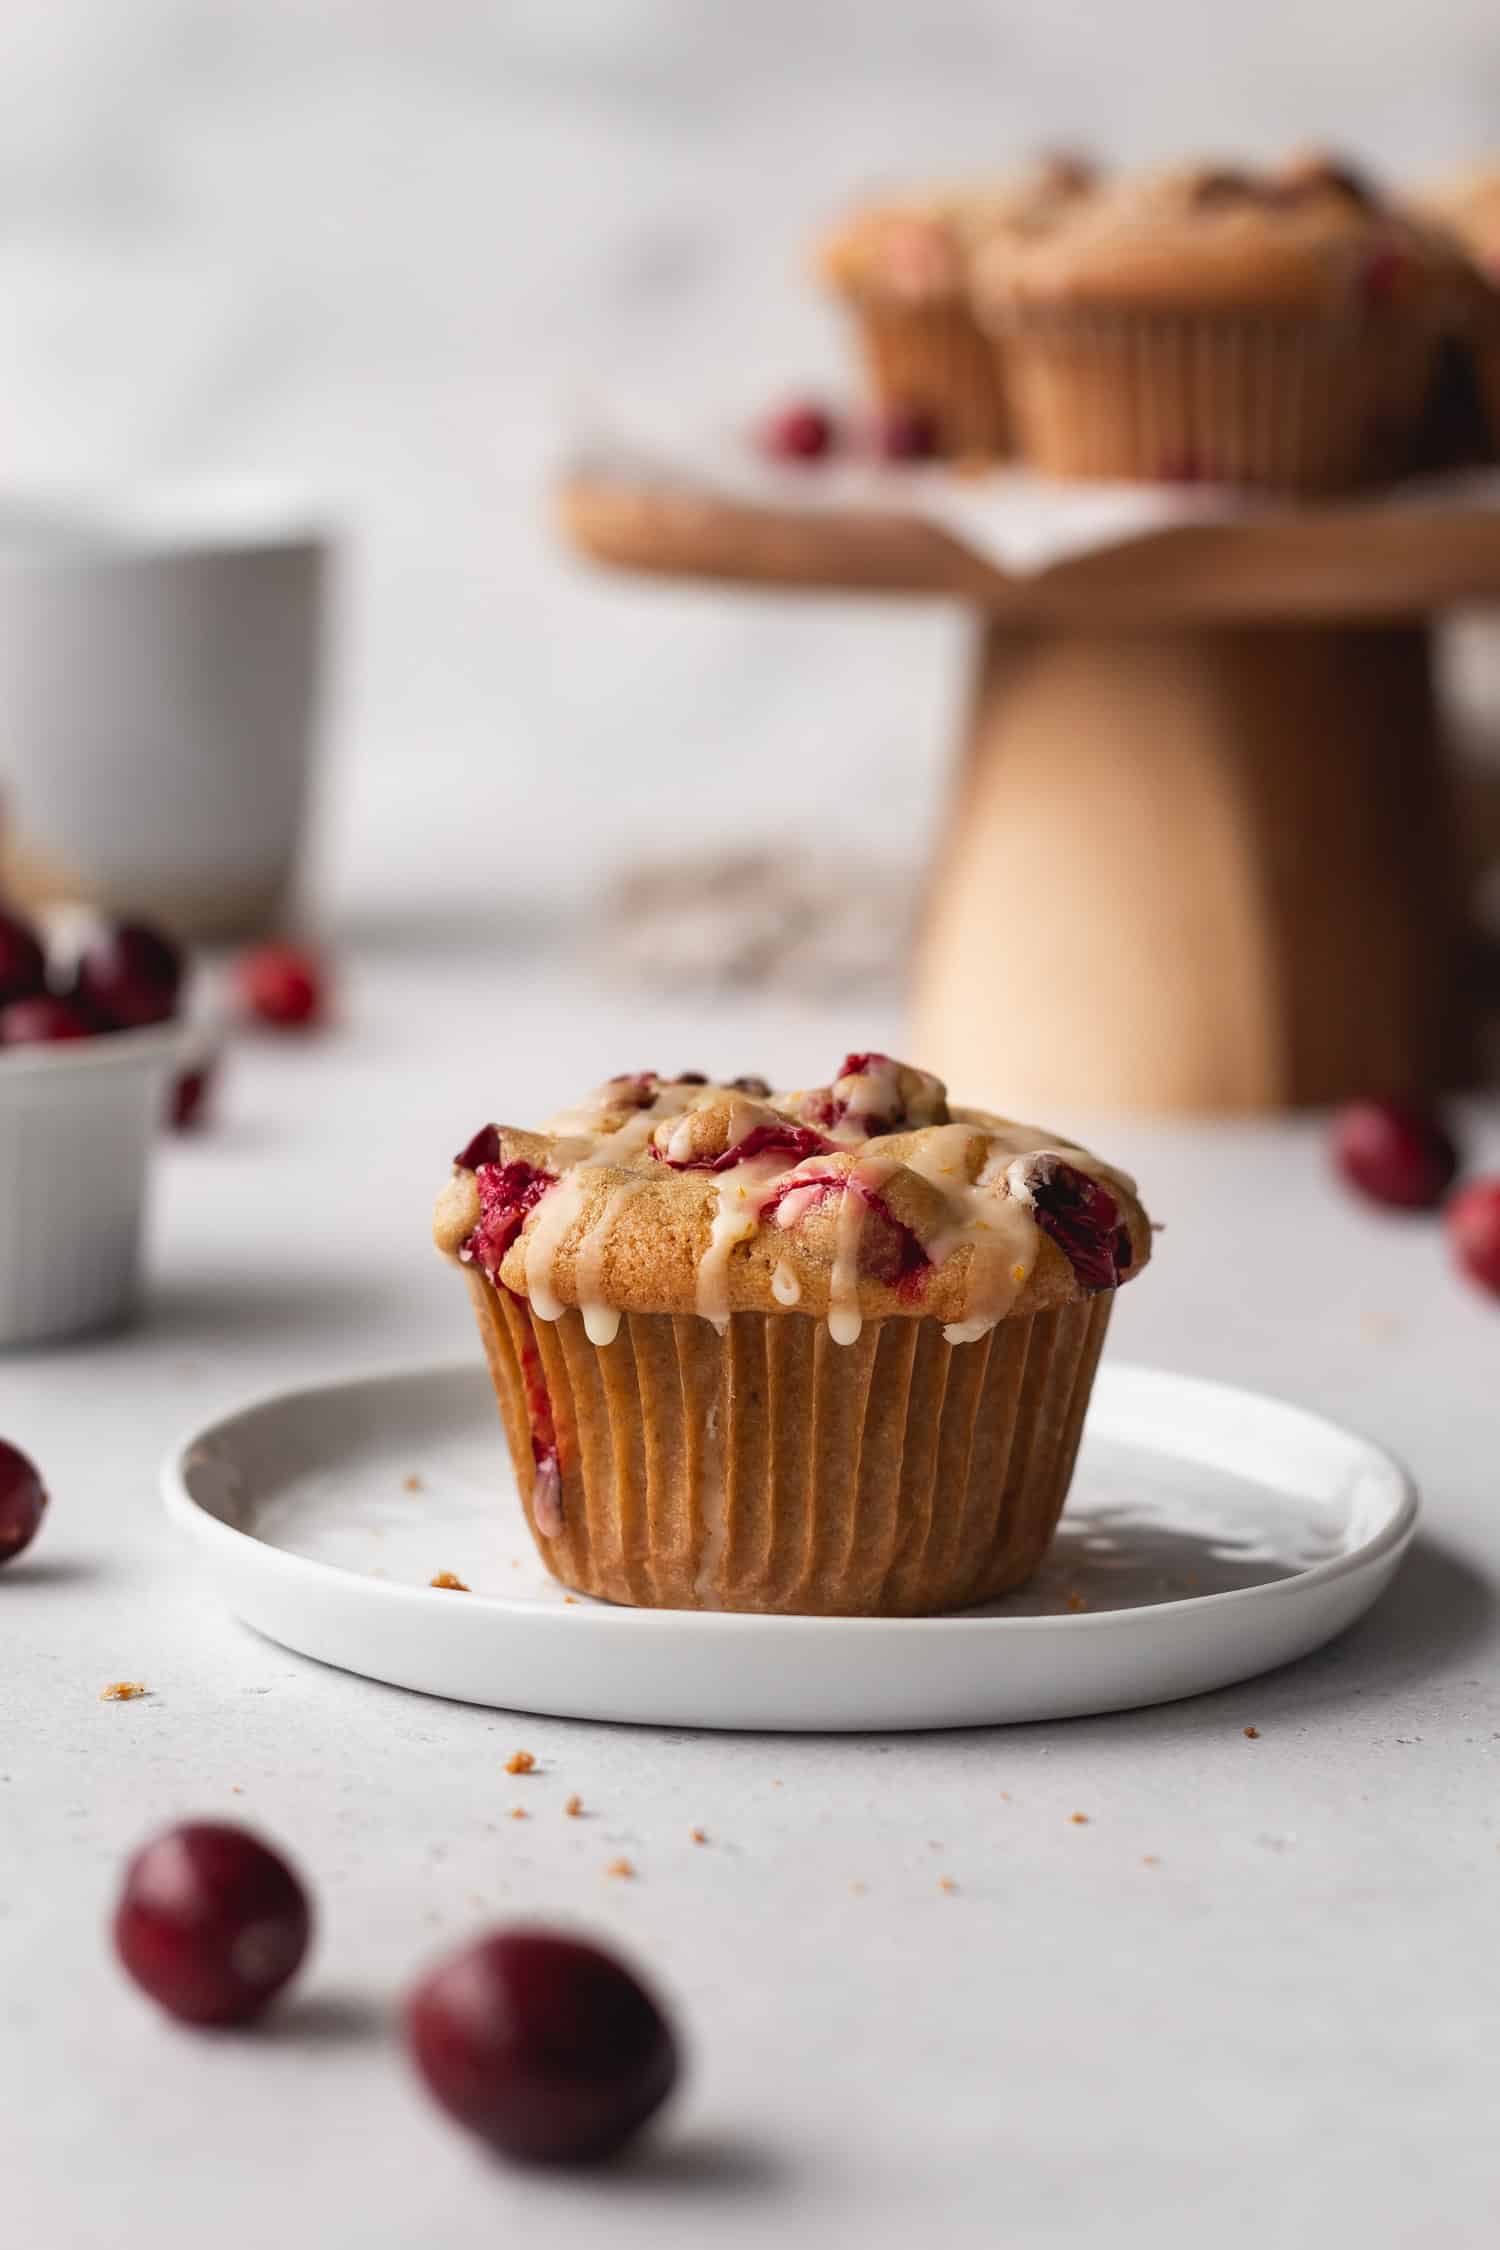 A cranberry orange muffin on a white plate